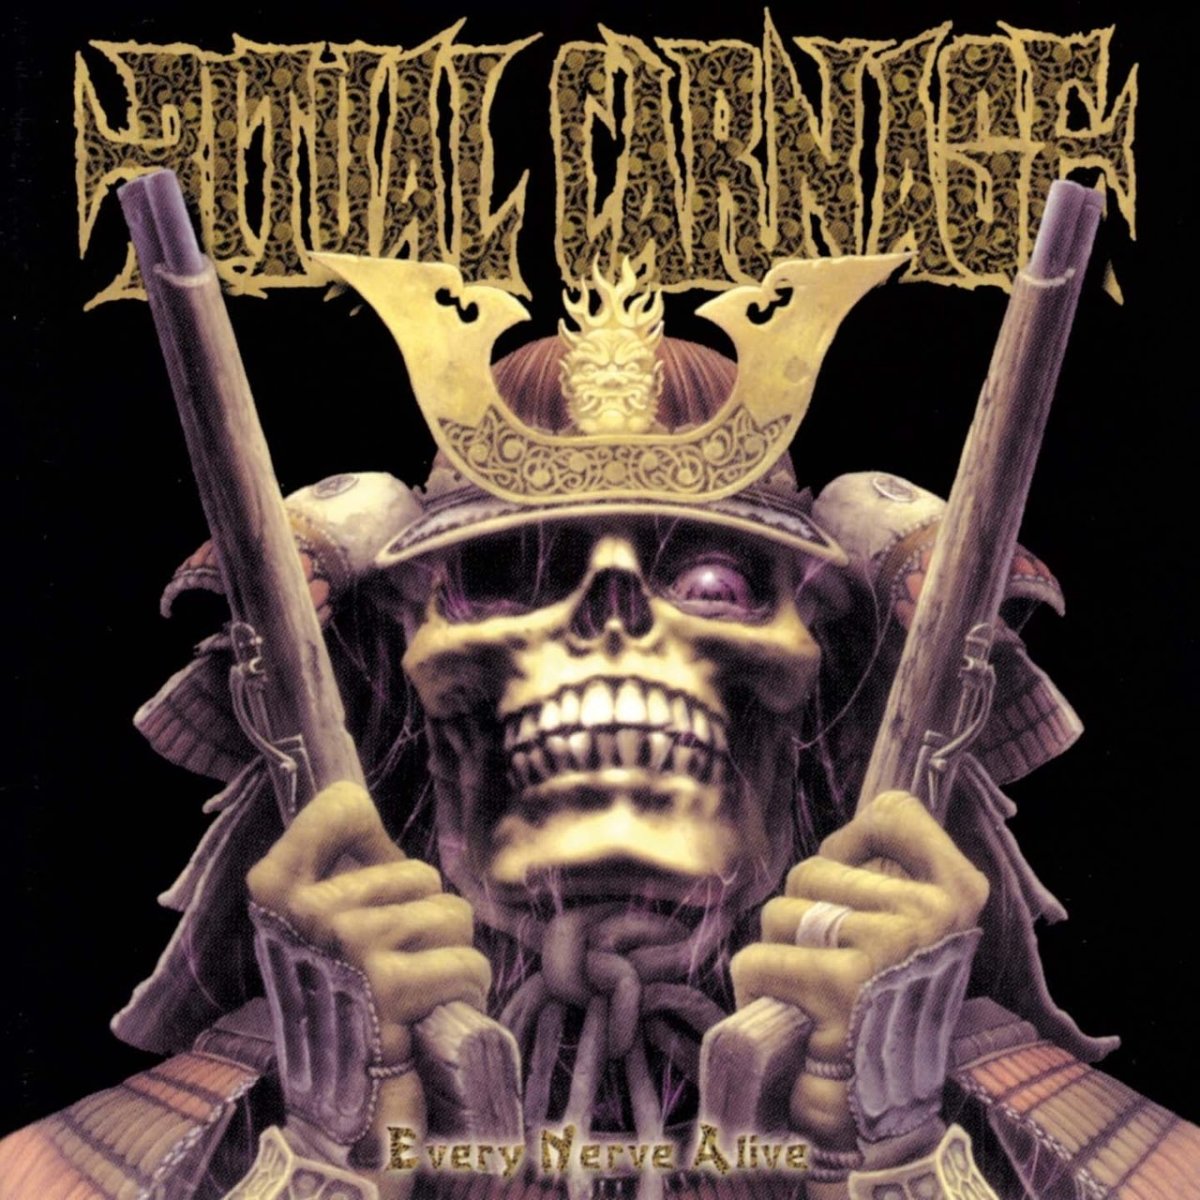 review-of-the-album-every-nerve-alive-by-japanese-thrash-metal-band-ritual-carnage